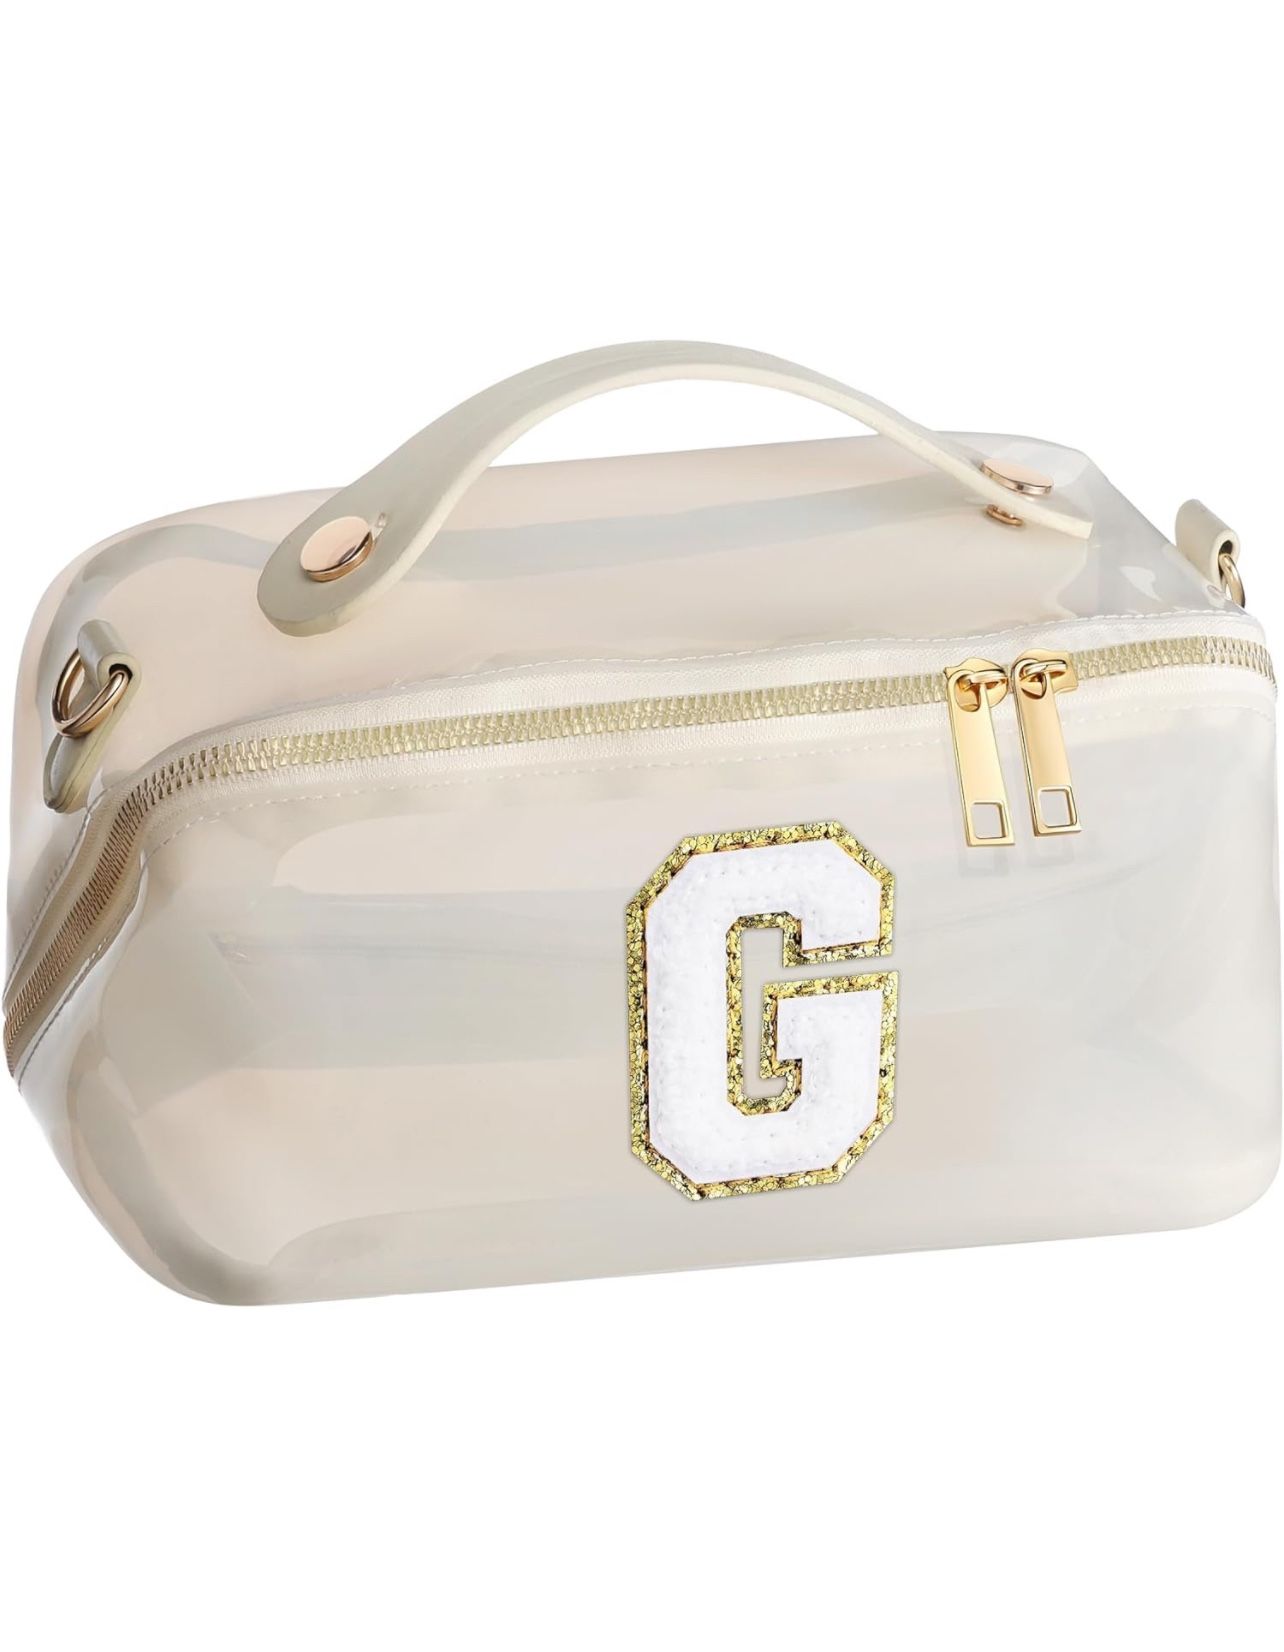 Brandnew Personalized Clear Bag for Stadium Event - Monogrammed Clear Bag Personalized Makeup Cosmetic Bag Travel Toiletry Bag for Women Birthday Gift